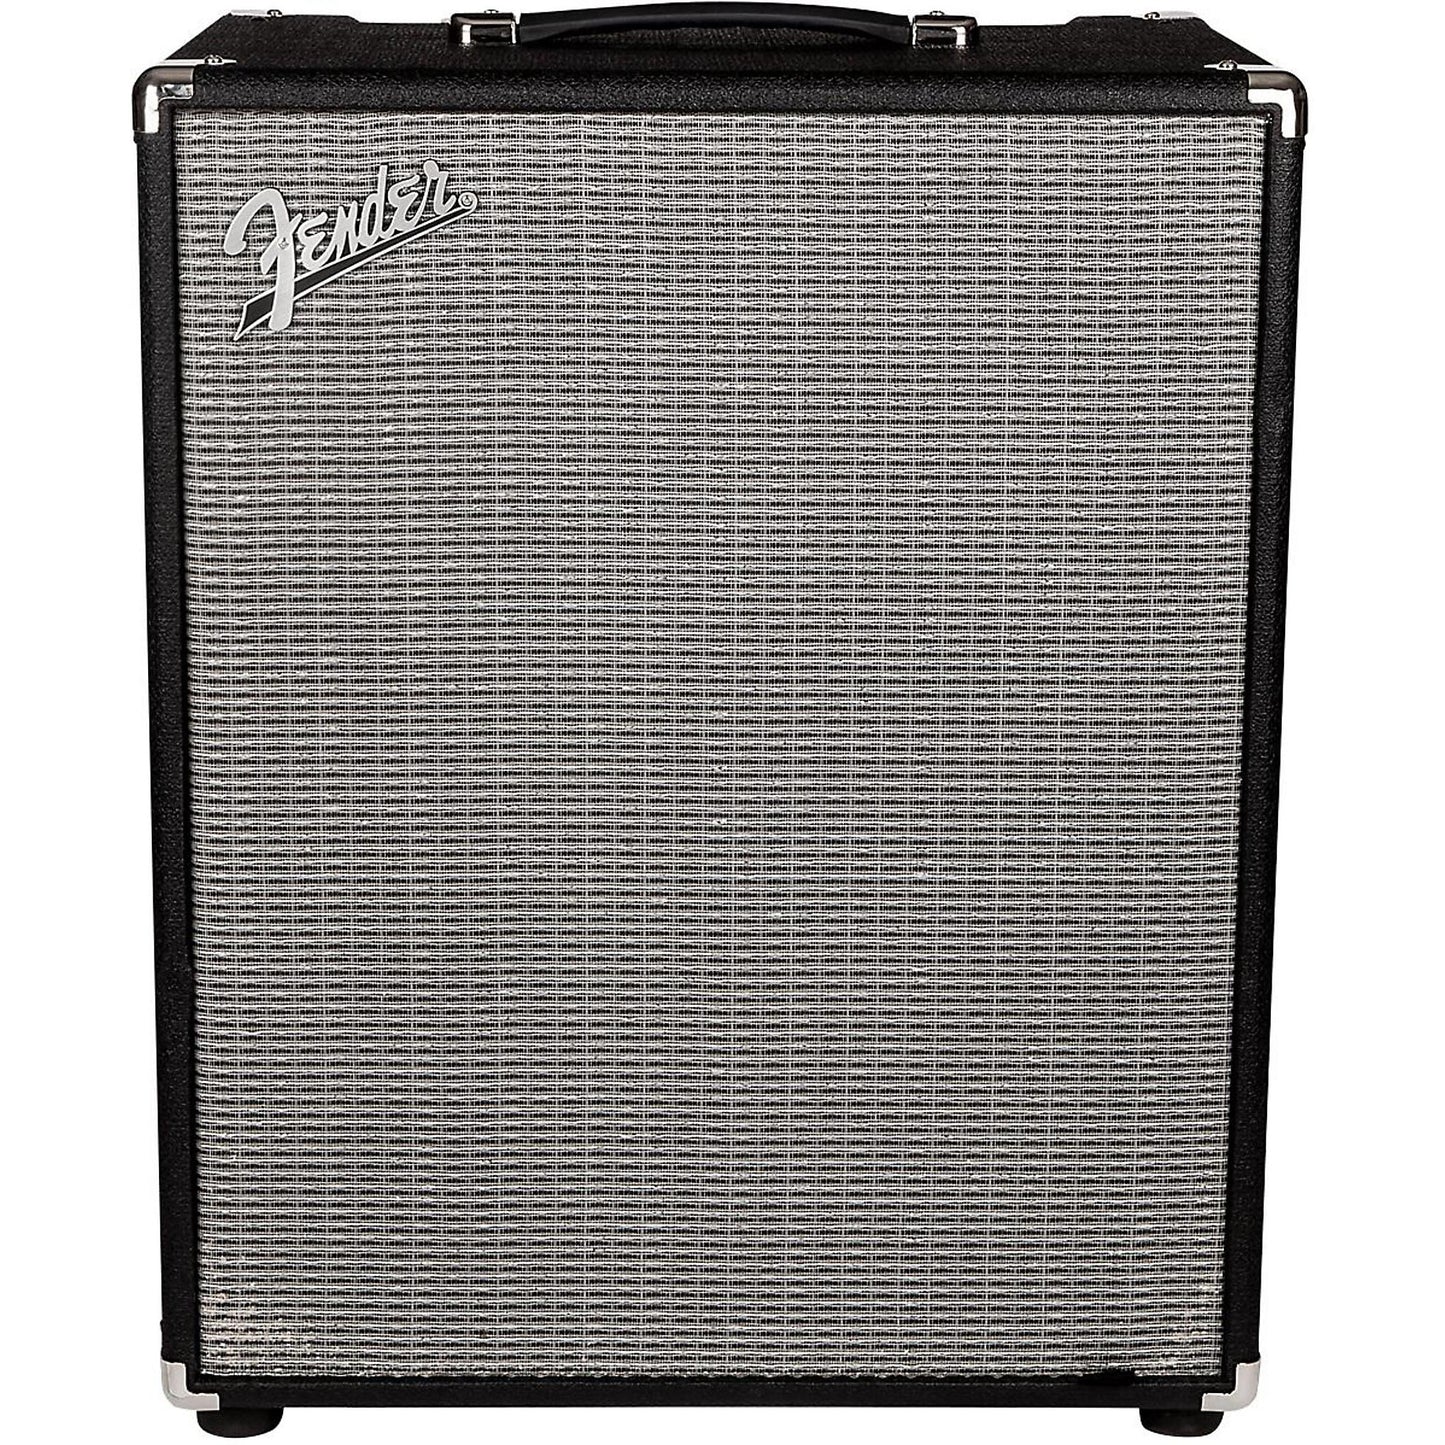 Fender Rumble 500 Electric Bass Combo Amplifier 500watts 120V (230V EUR) with Dual 10in Speaker Compression Horn FX Loop XLR Line Out Ground Lift